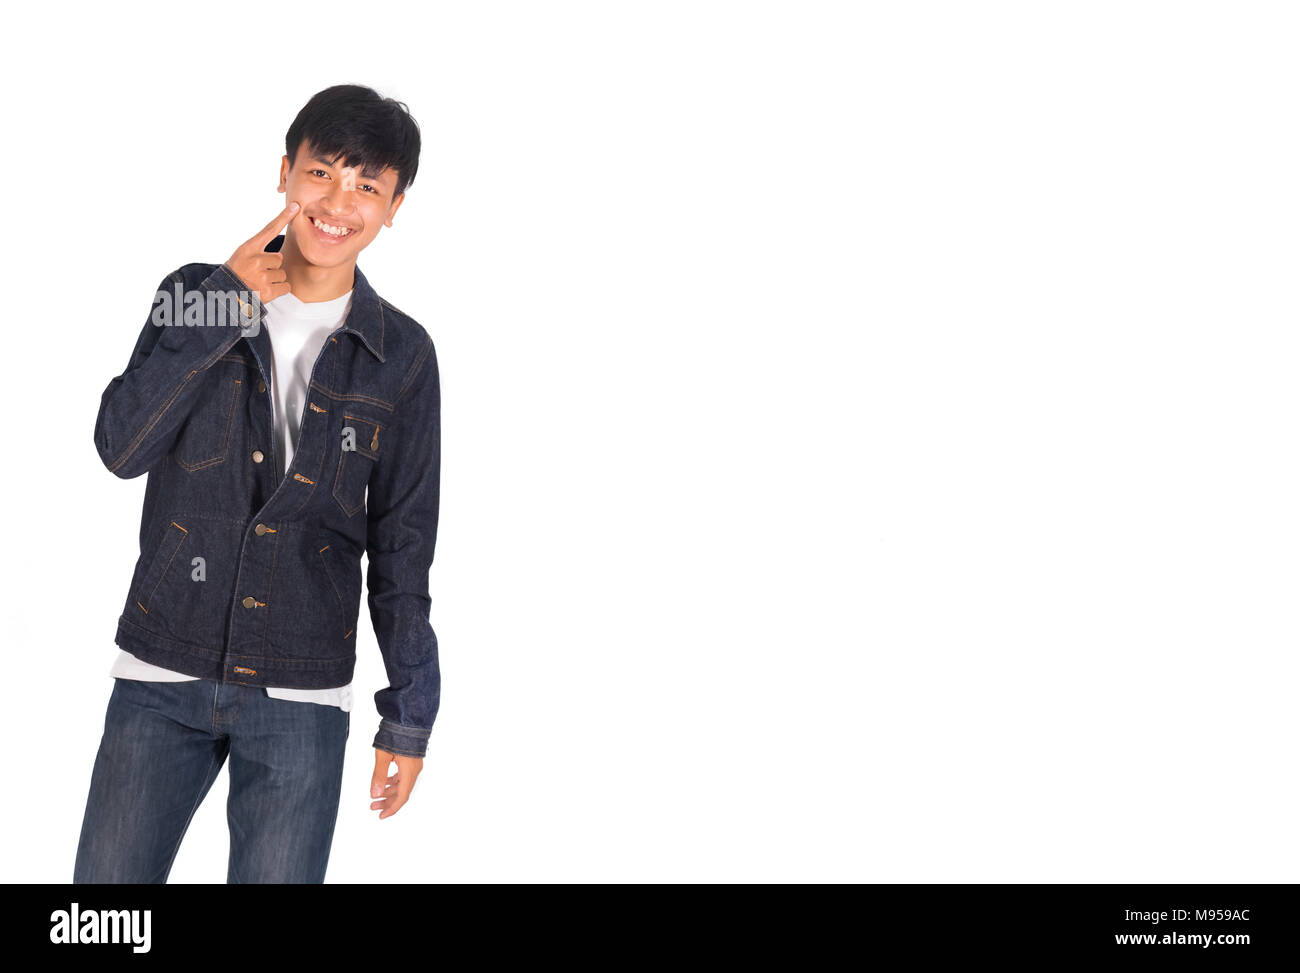 The Portrait Photo Of An Asian Man In Dark Blue Jeans Jacket And White Shirt Isolated Stock Photo Alamy